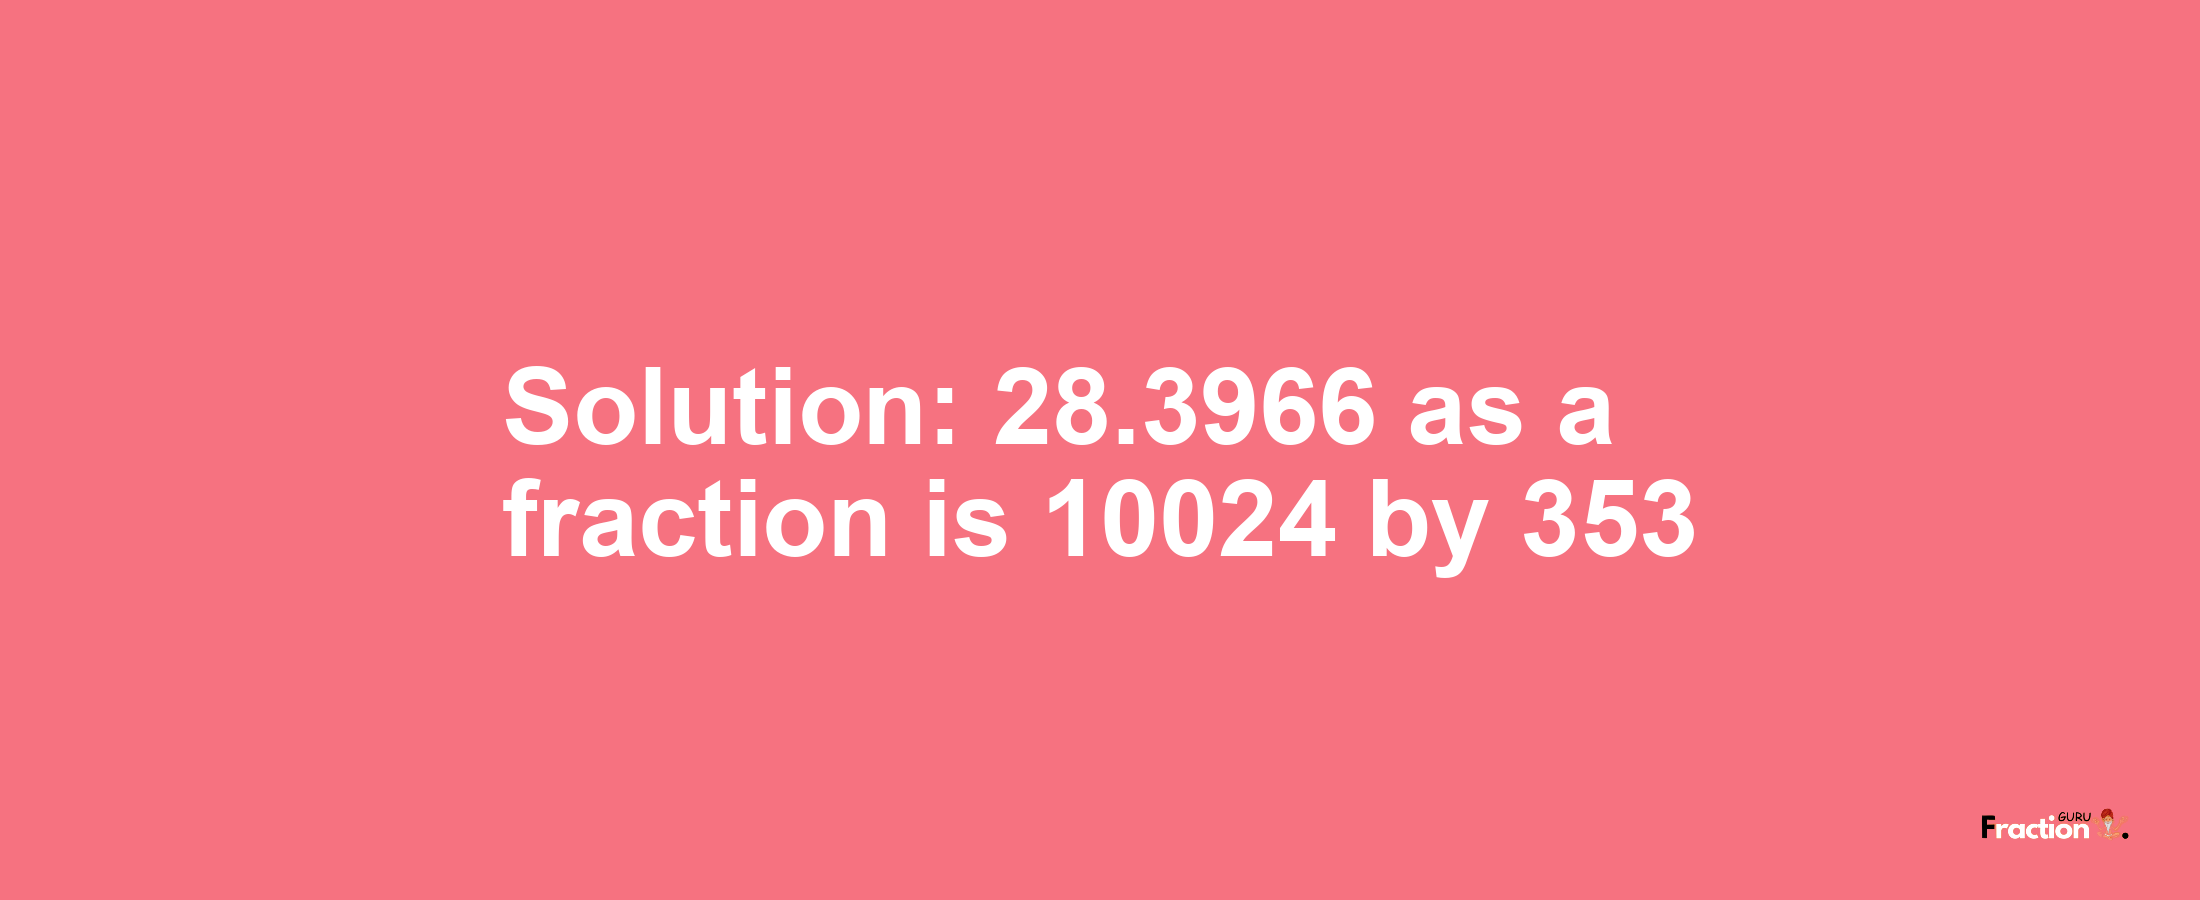 Solution:28.3966 as a fraction is 10024/353